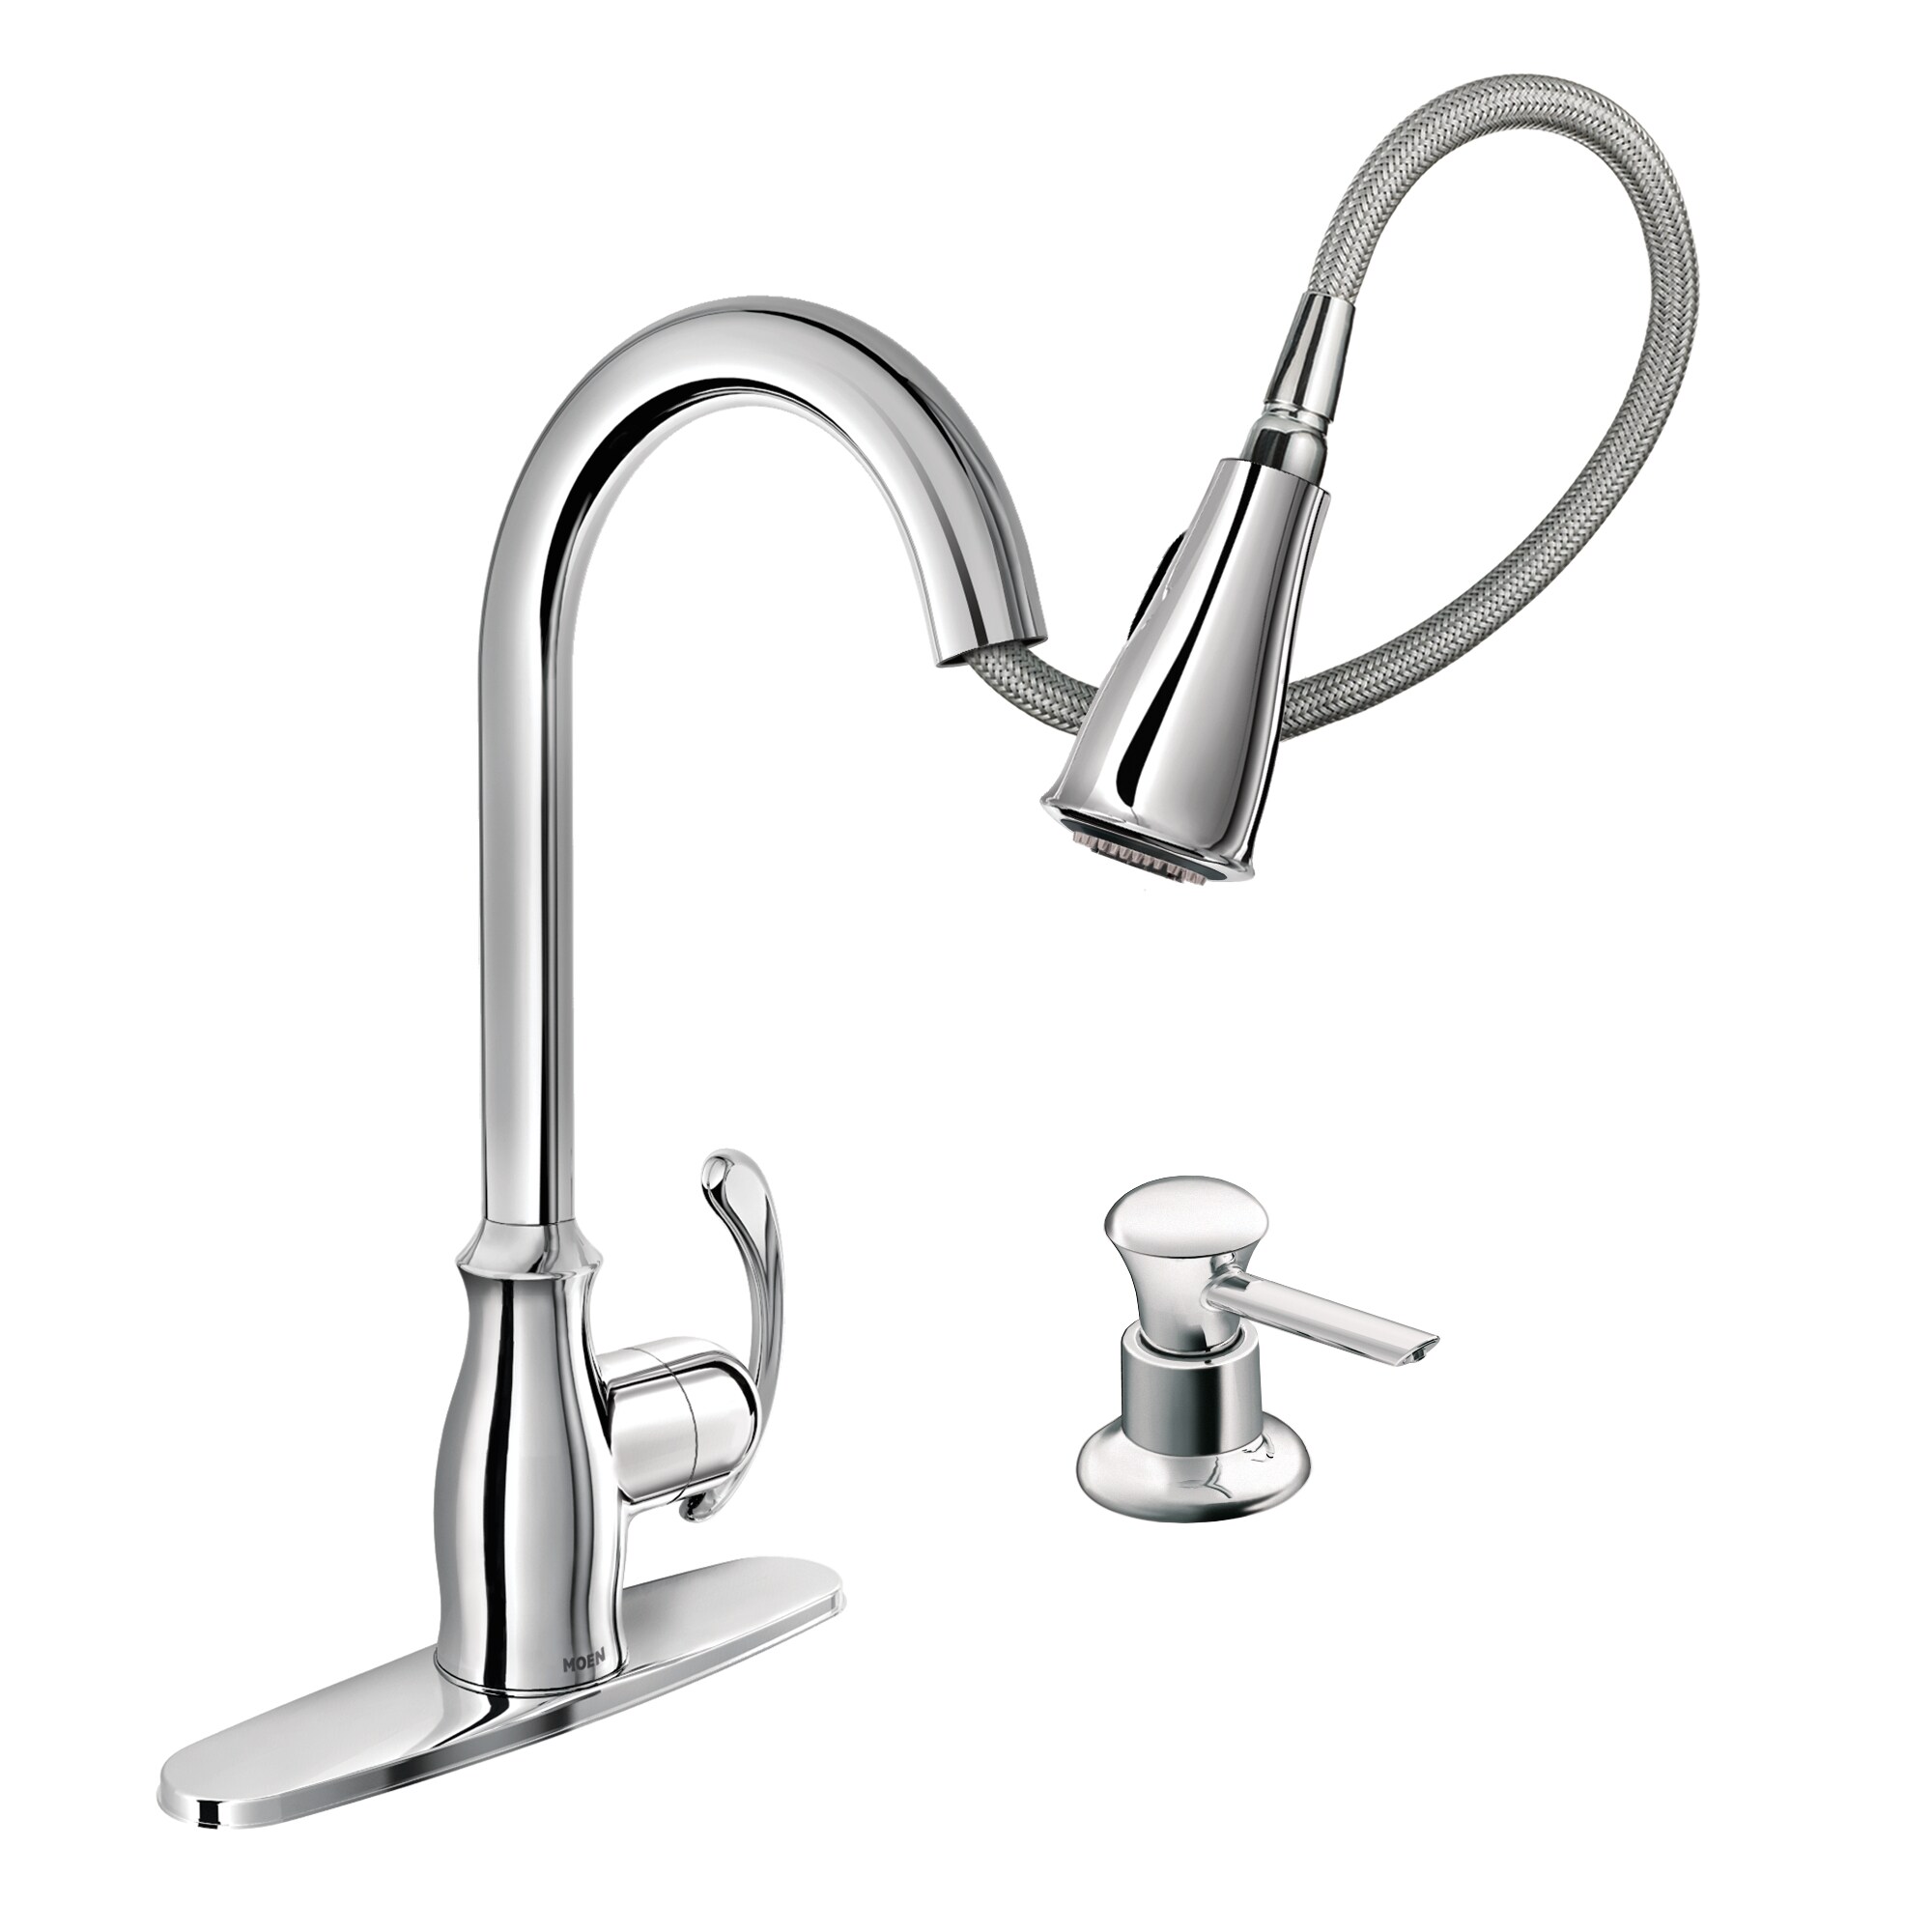 Moen Kipton Chrome Single Handle Pull-down Kitchen Faucet with Sprayer Function (Deck Plate Included)